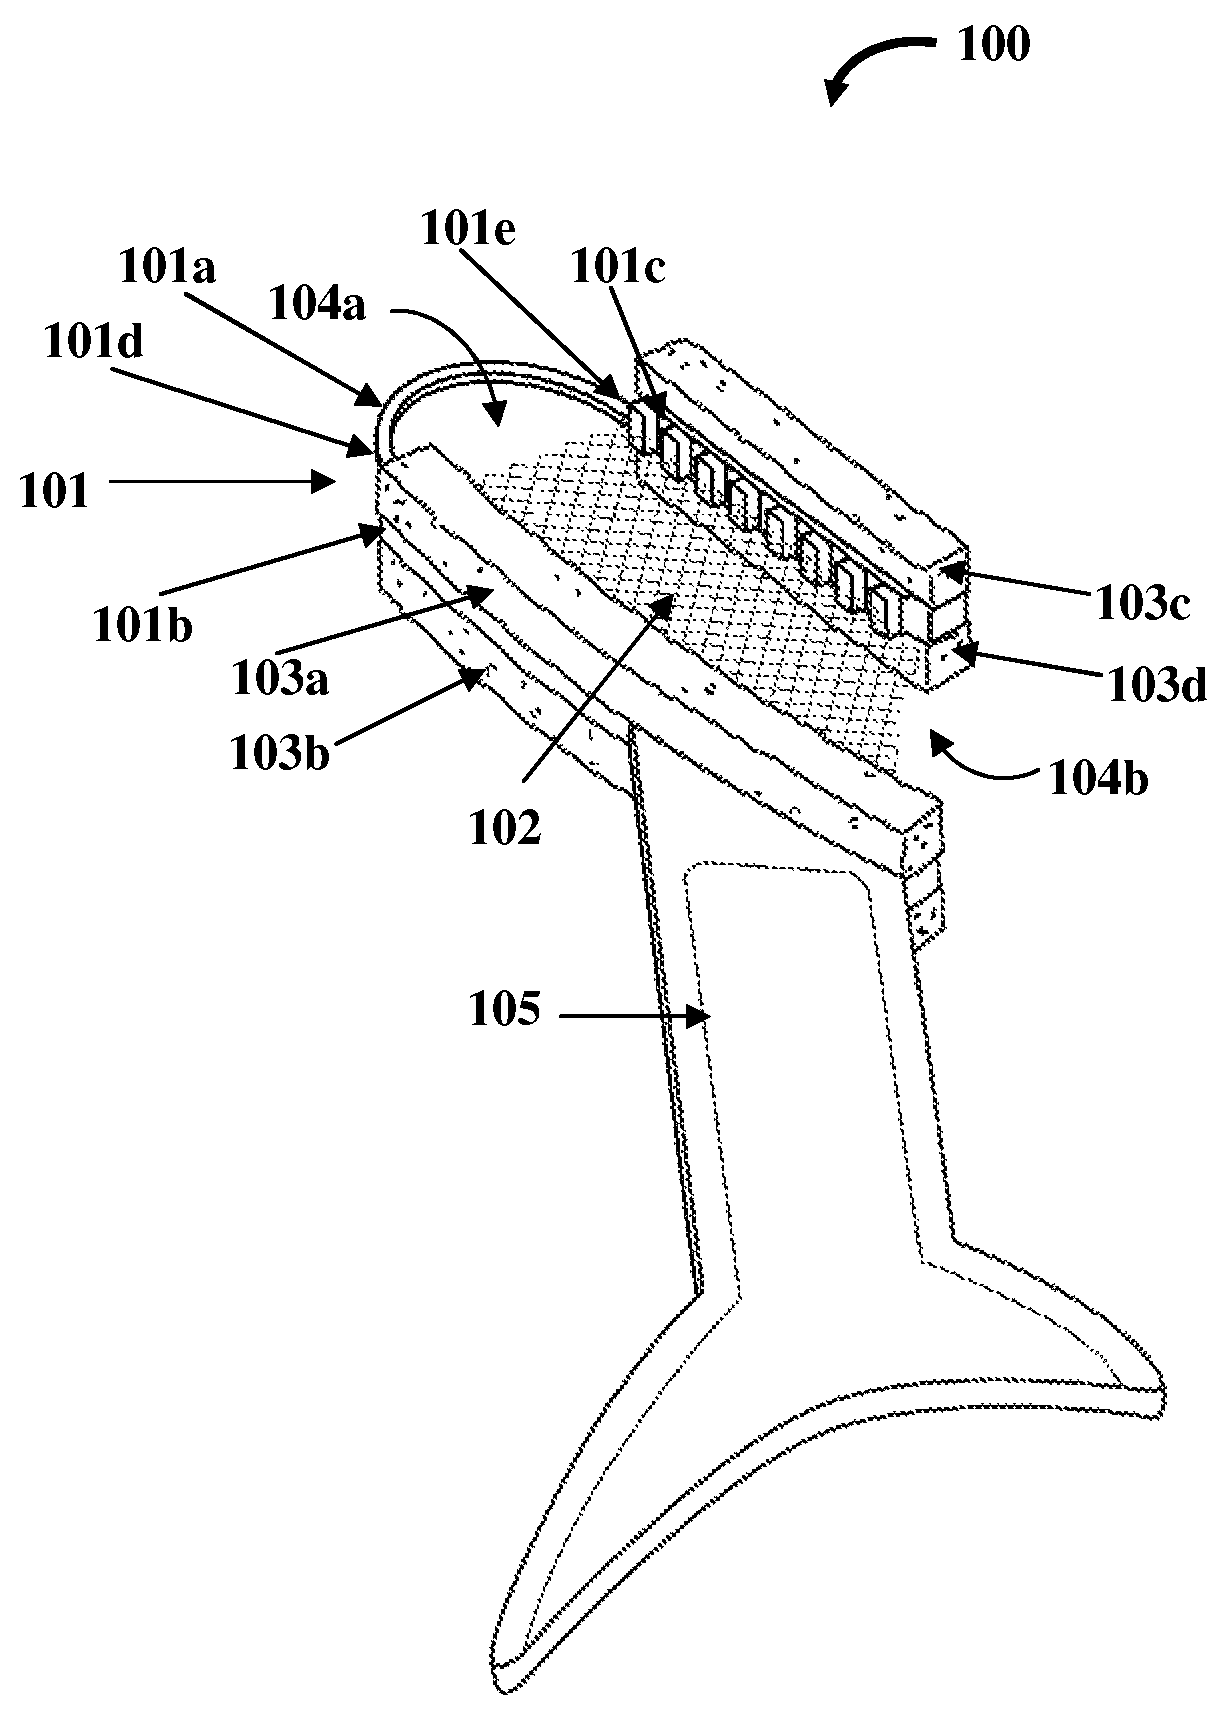 Dental impression tray with absorbent barriers